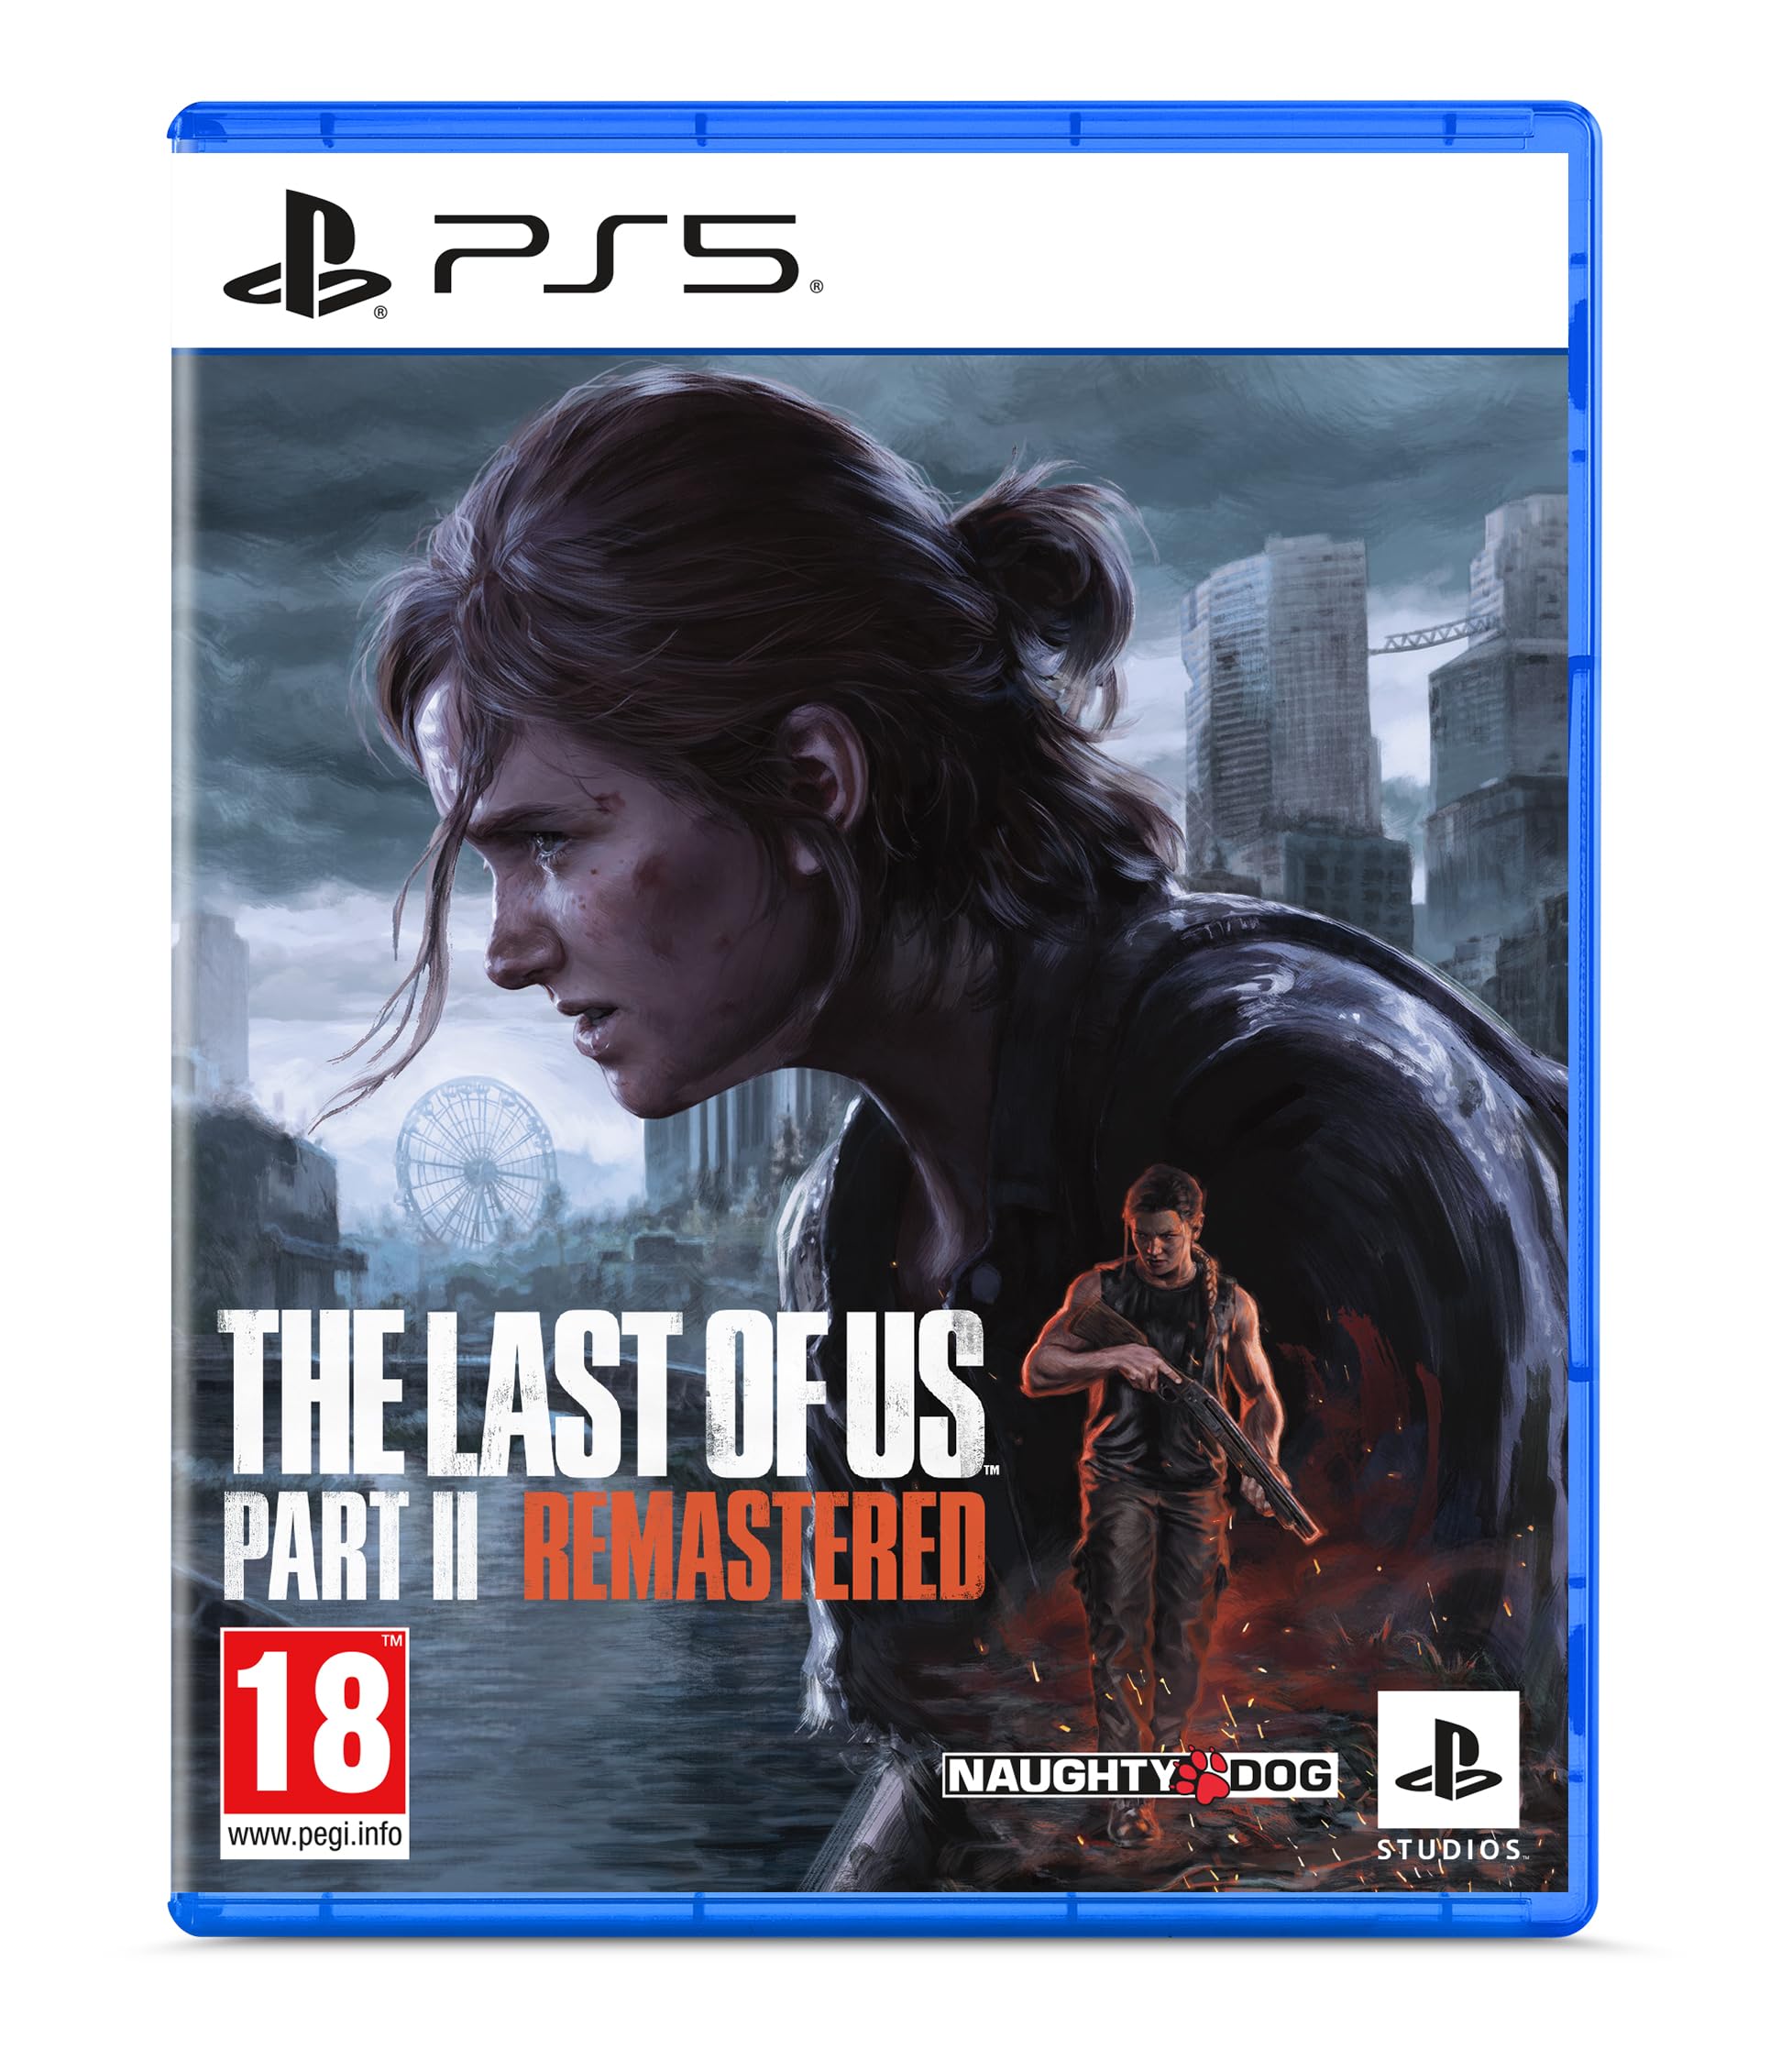 grand choix PlayStation The Last of Us Part II Remastered (PS5) 3wgz9WOCi vente chaude